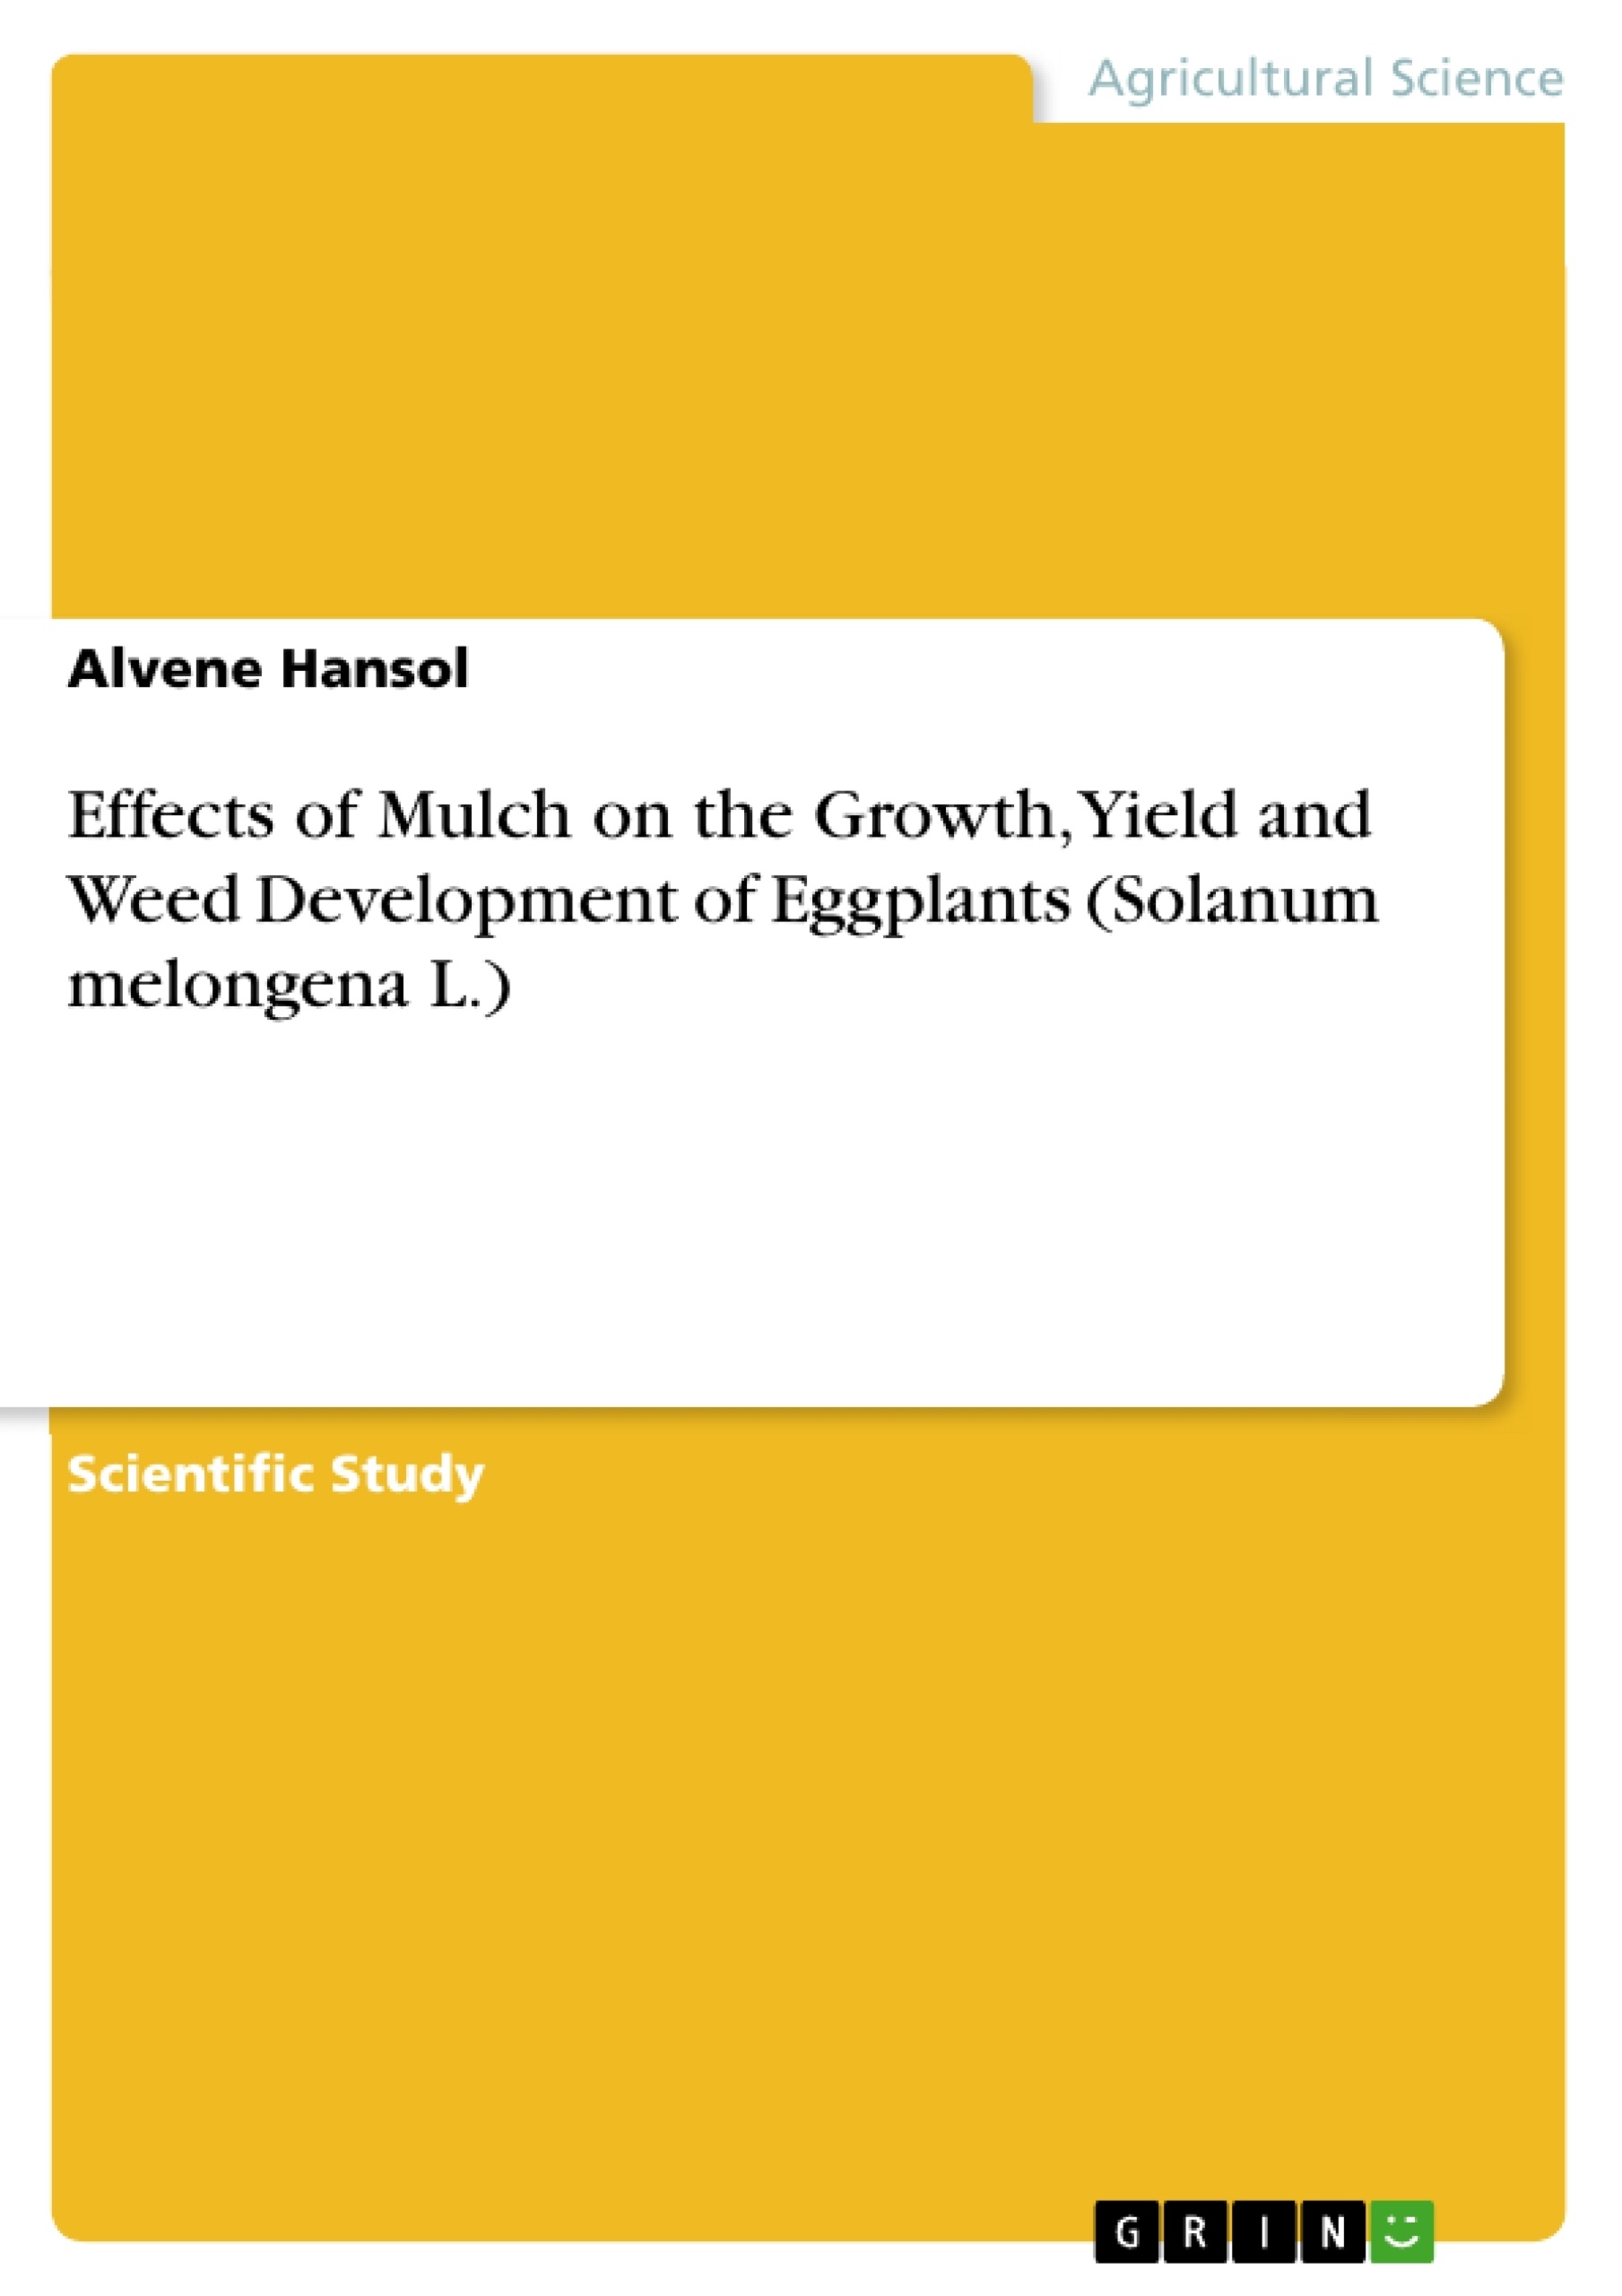 Titel: Effects of Mulch on the Growth, Yield and Weed Development of Eggplants (Solanum melongena L.)